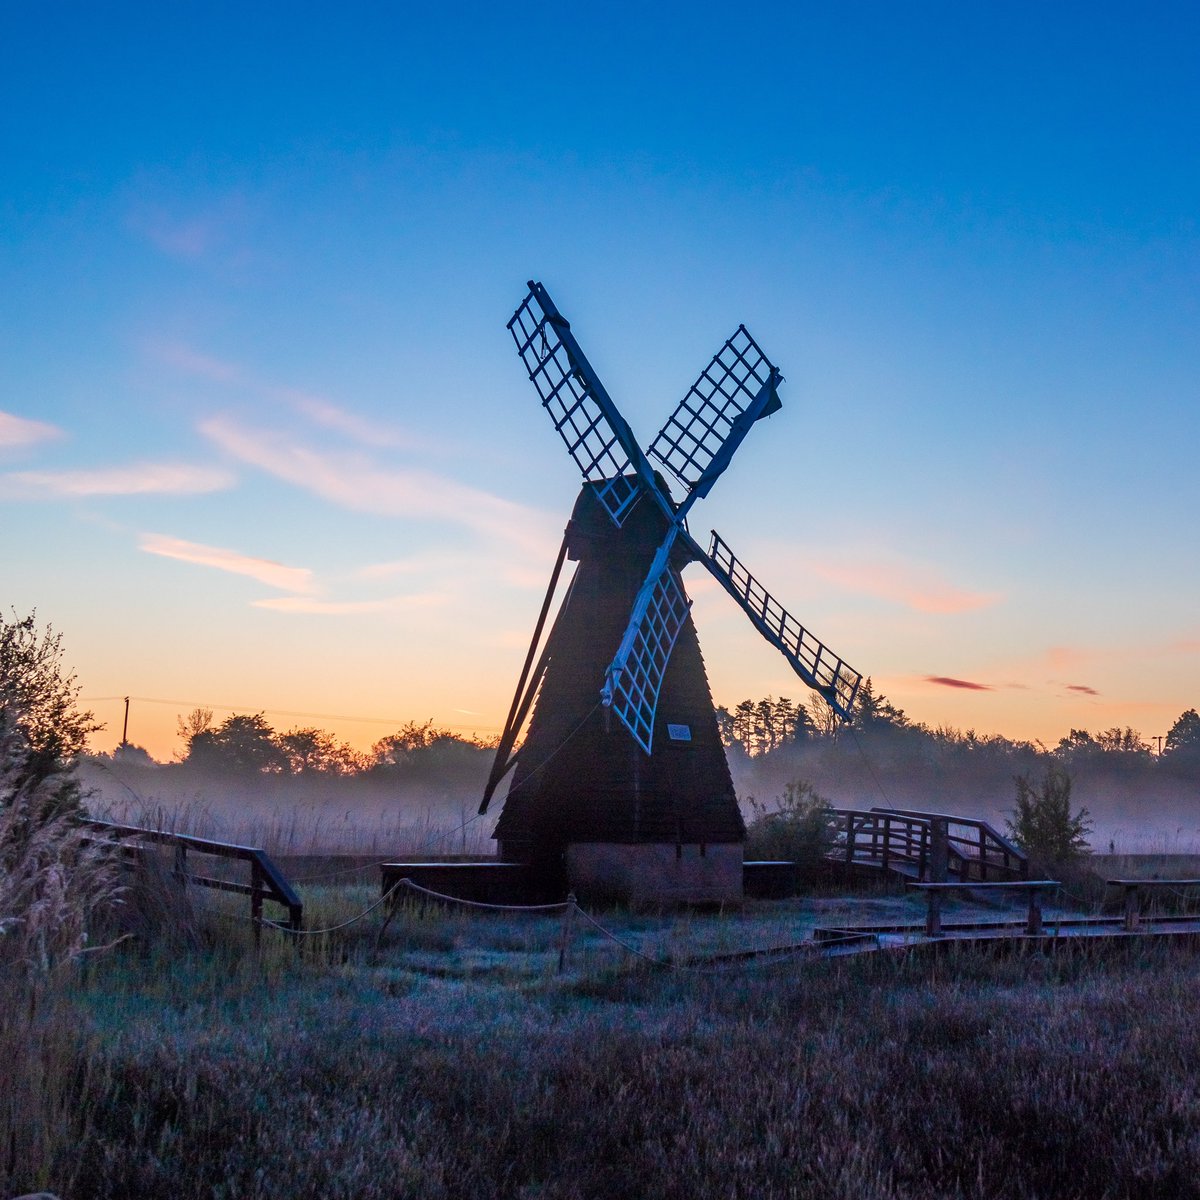 Very proud to get this image in todays @Telegraph 😀 @ElyPhotographic @StormHour @ThePhotoHour @Picfair @SpottedInEly @FascinatingFens @Fen_SCENE @AP_Magazine #landscapephotography @BabylonArtsEly #sunrise #dawn #windpump #misty #frosty